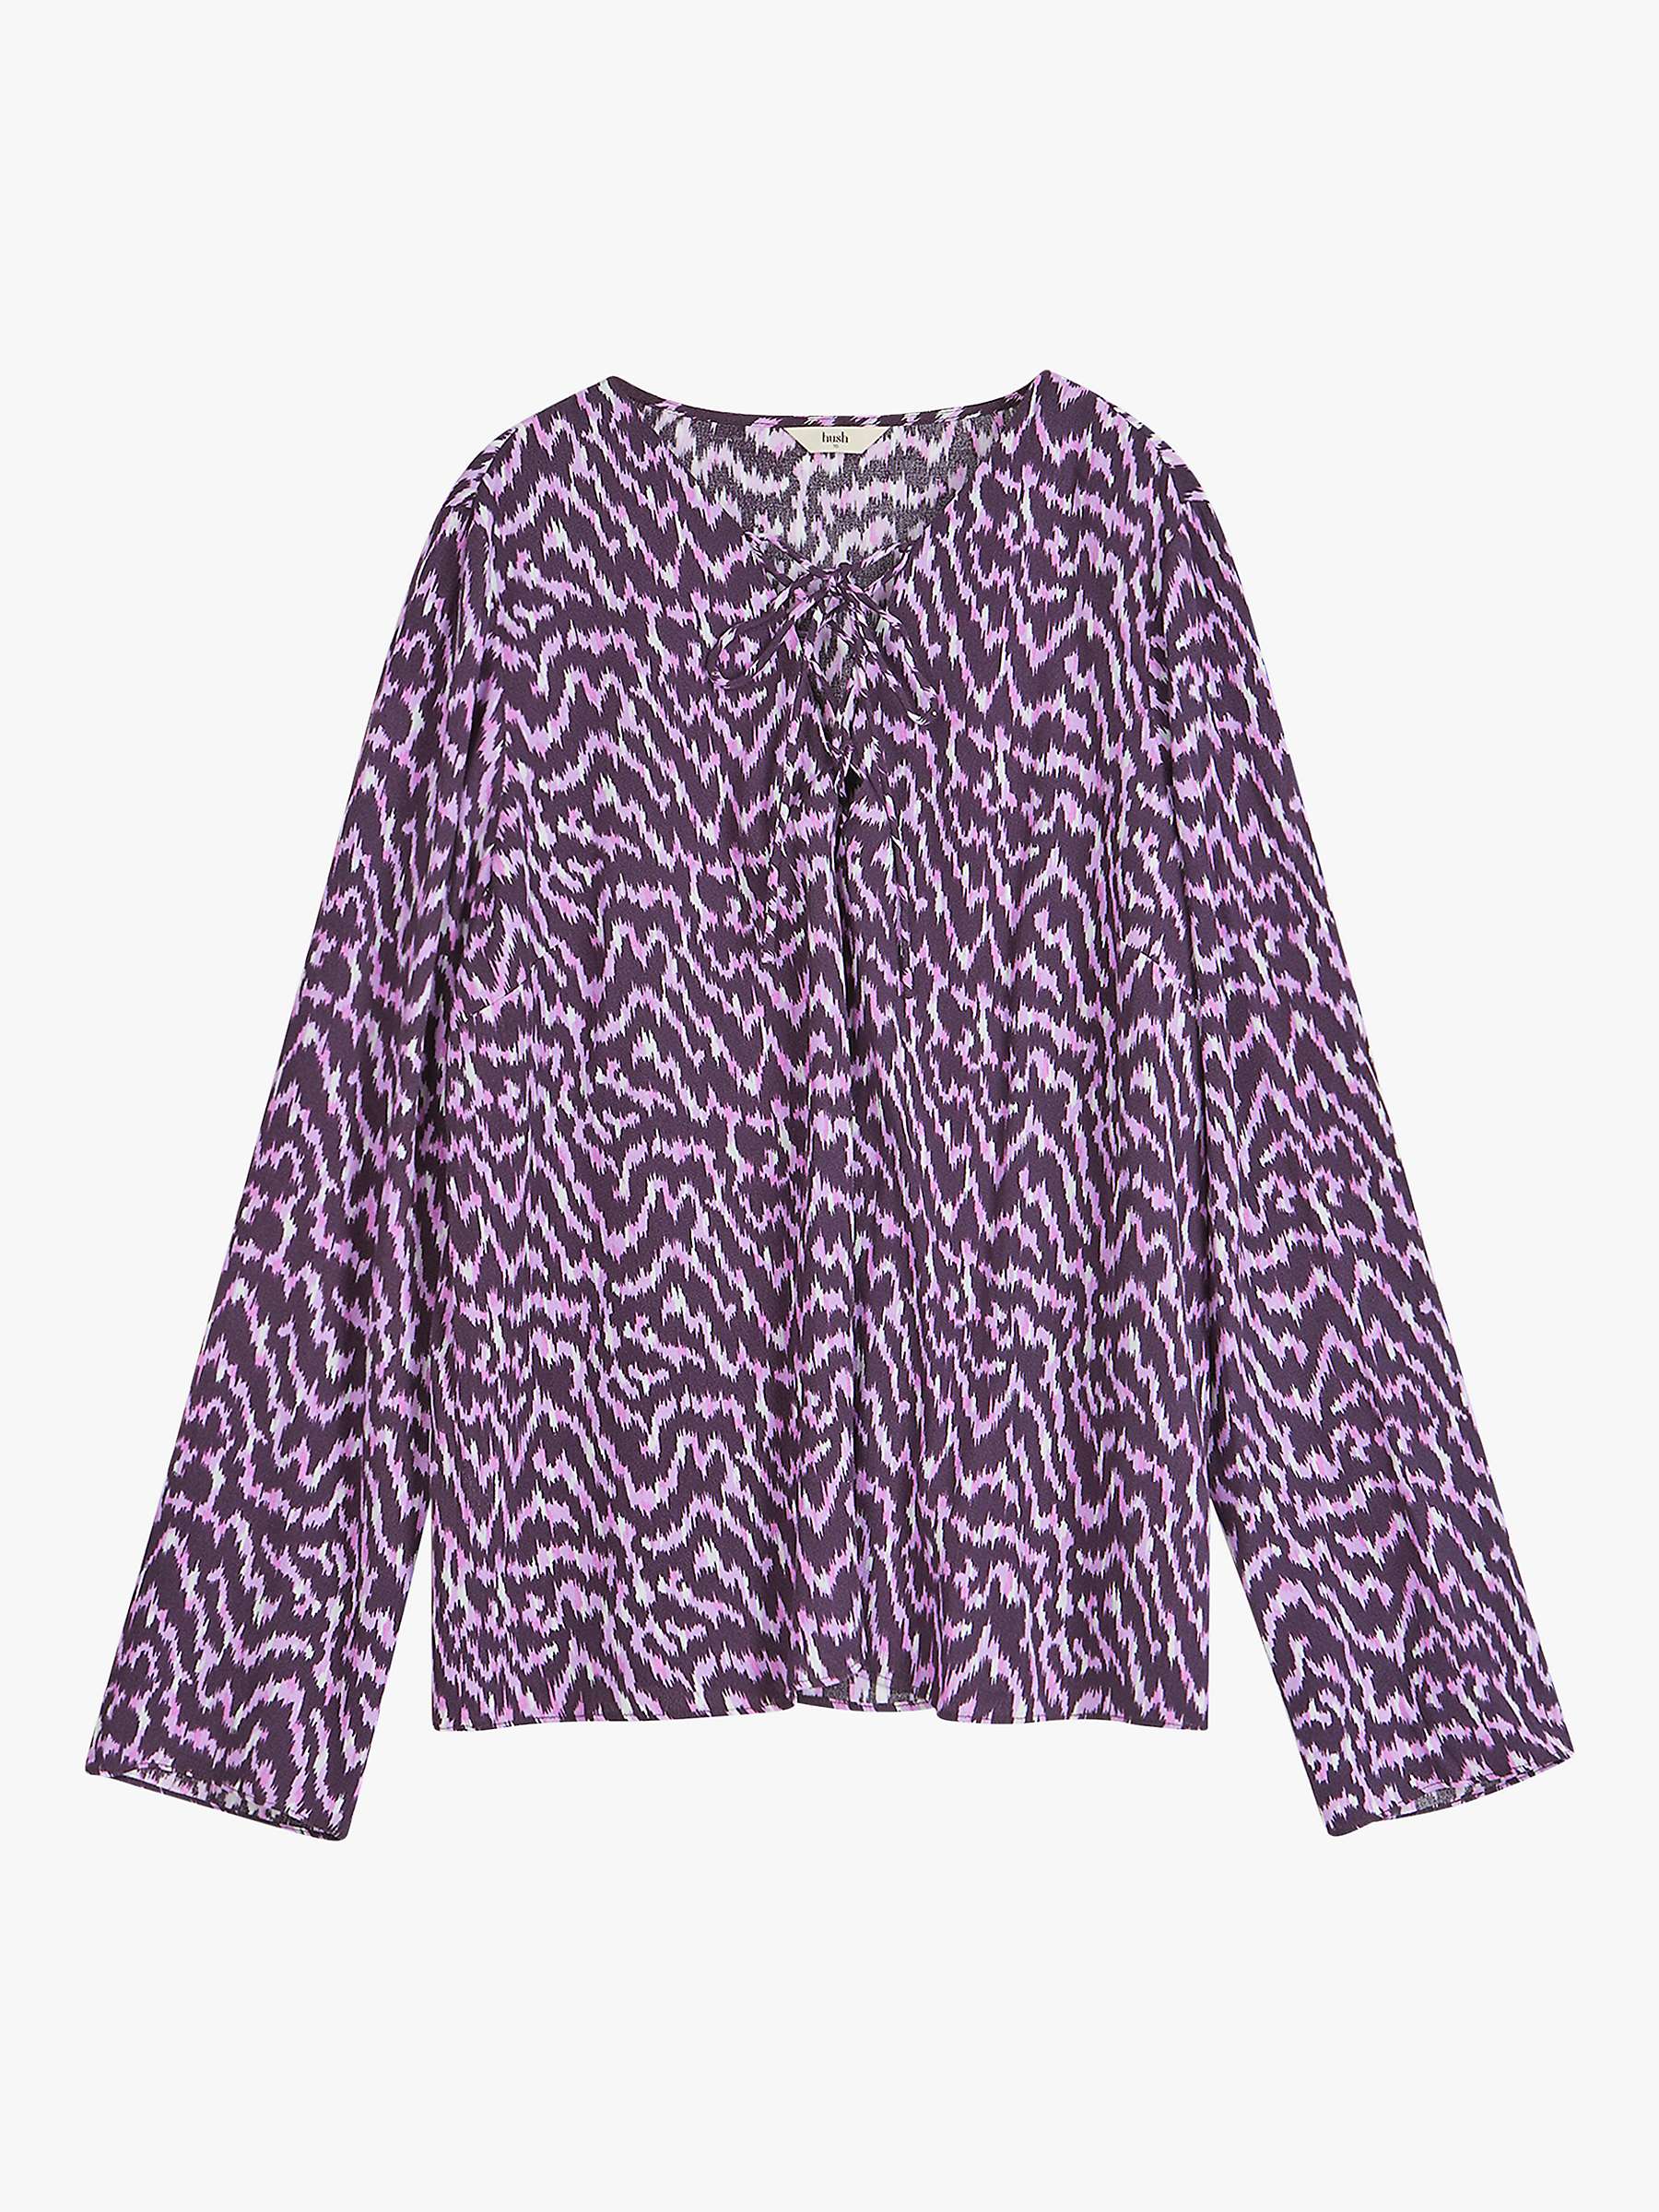 Buy HUSH Elianna Lace Up Blouse, Lilac Online at johnlewis.com